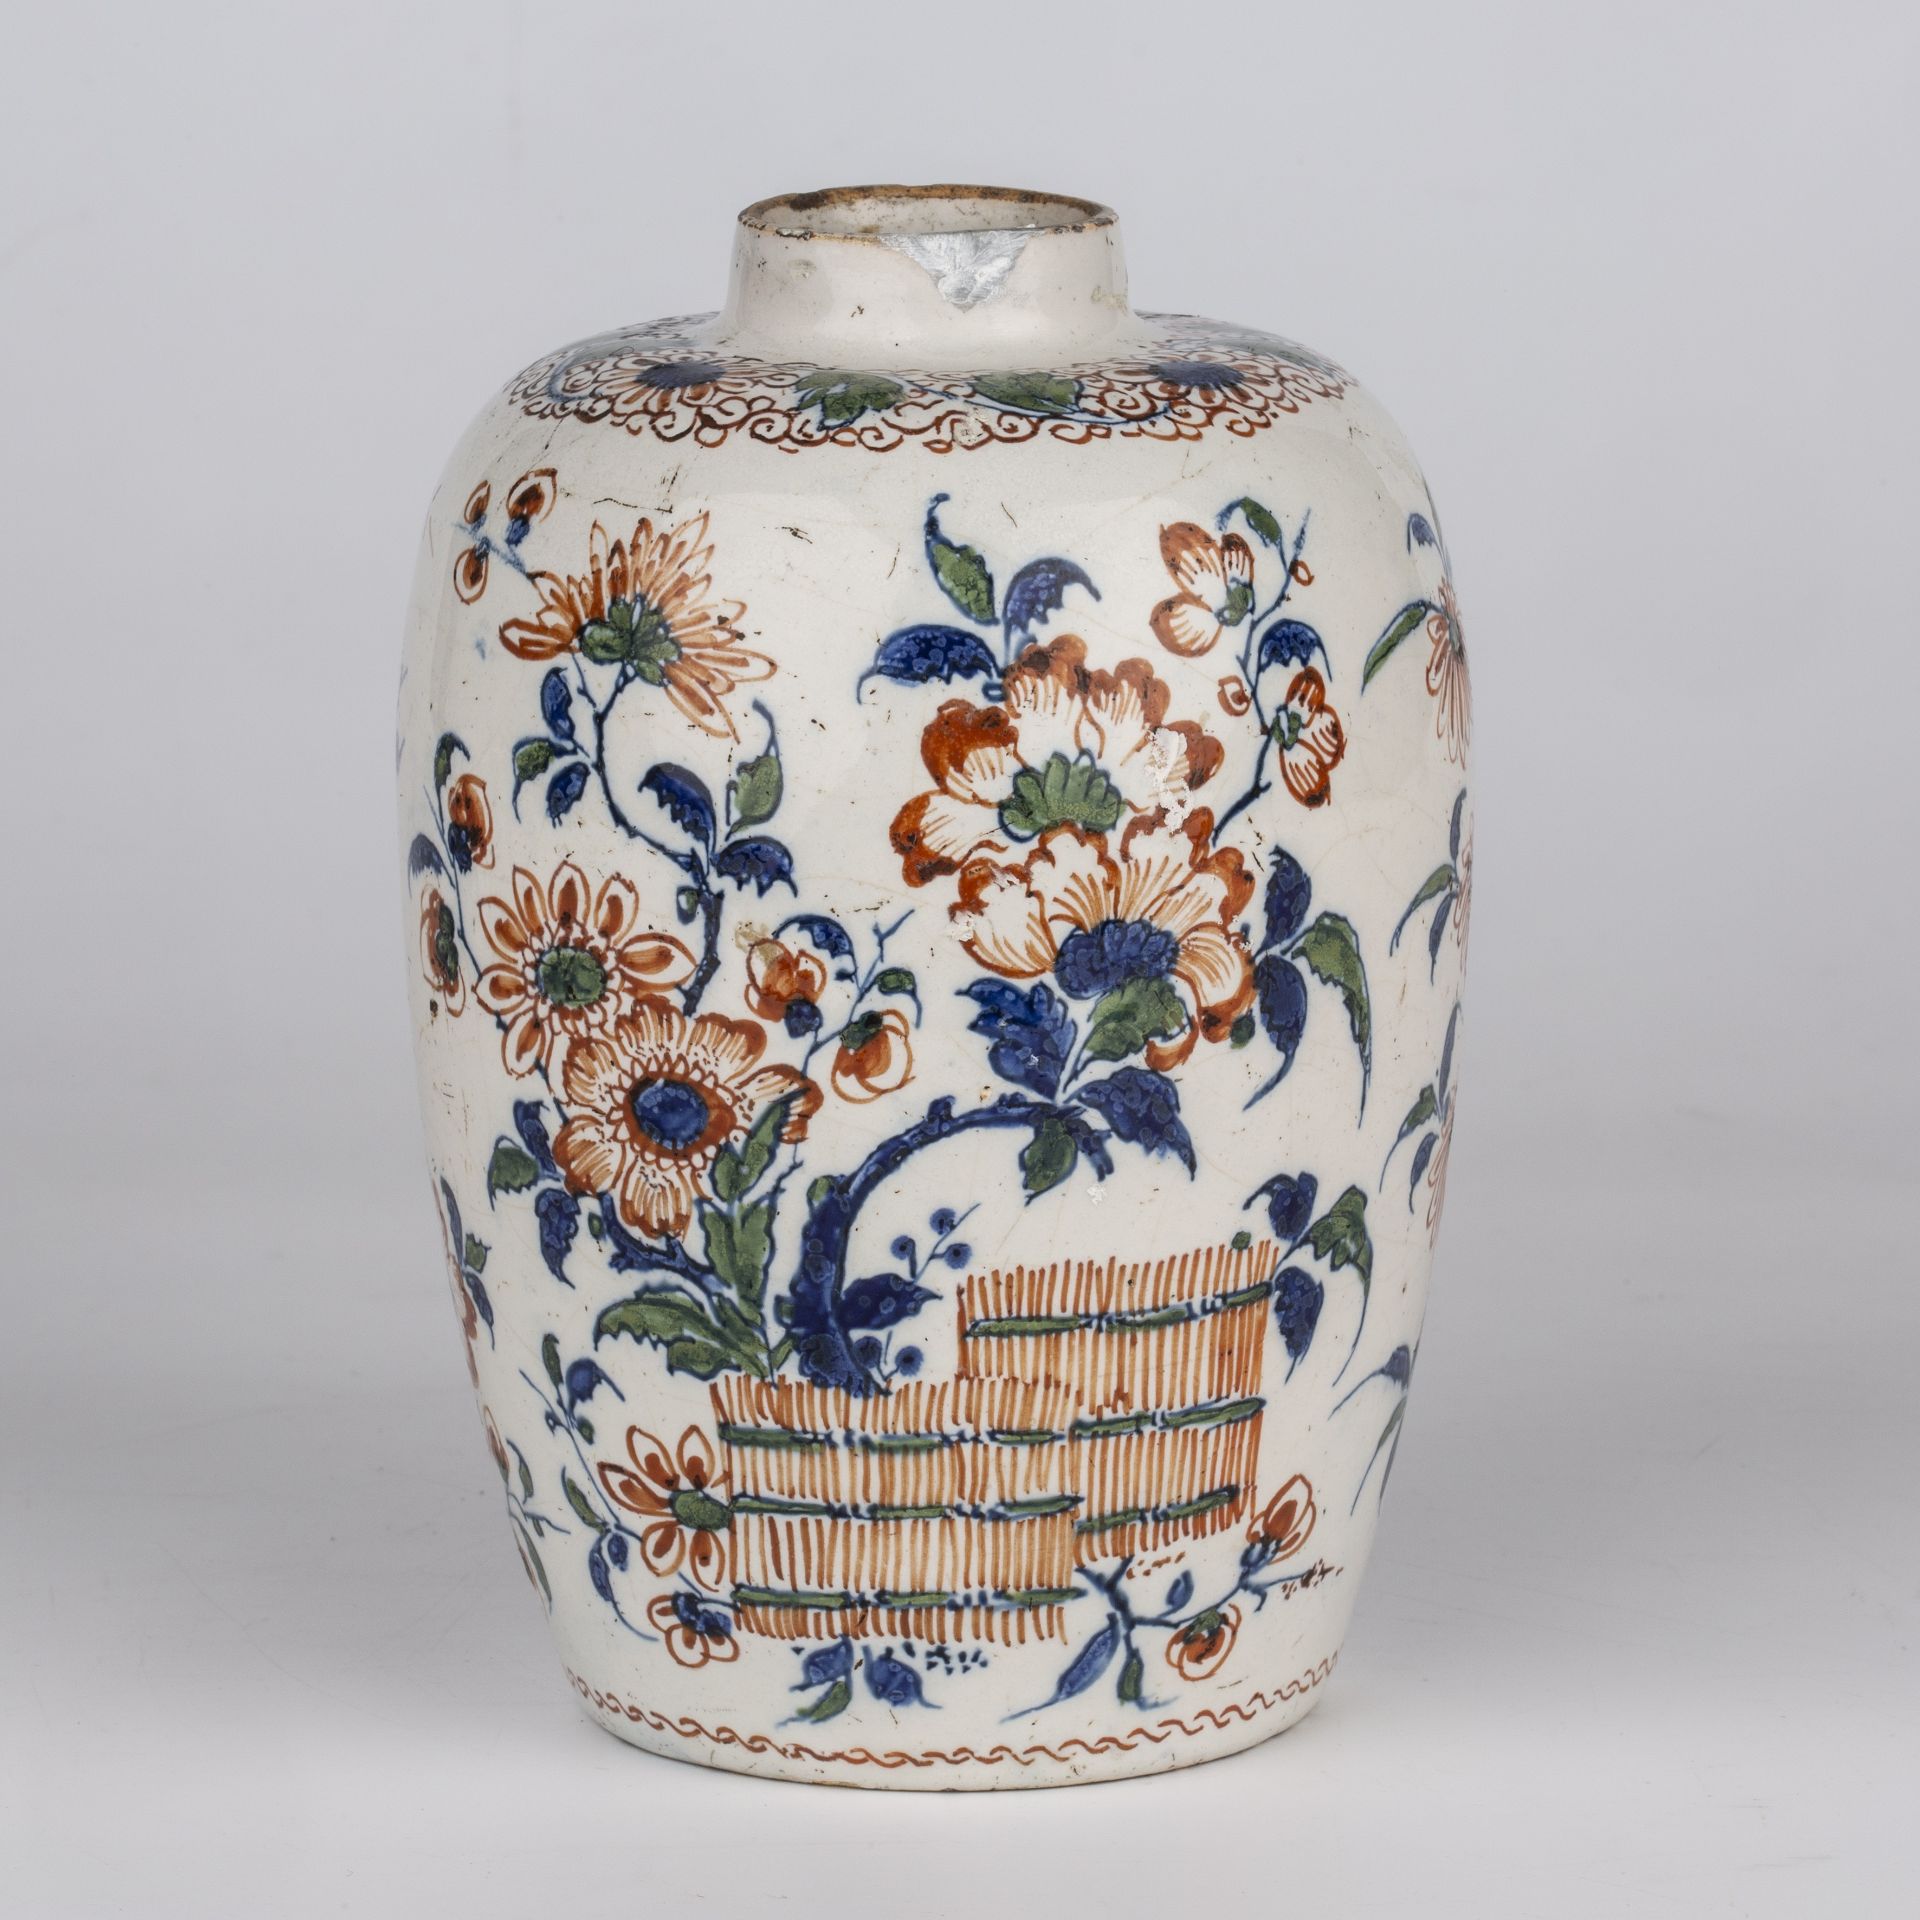 An early 18th century Dutch Delft polychrome vase circa 1720, 10cm wide 14cm high small - Image 2 of 3